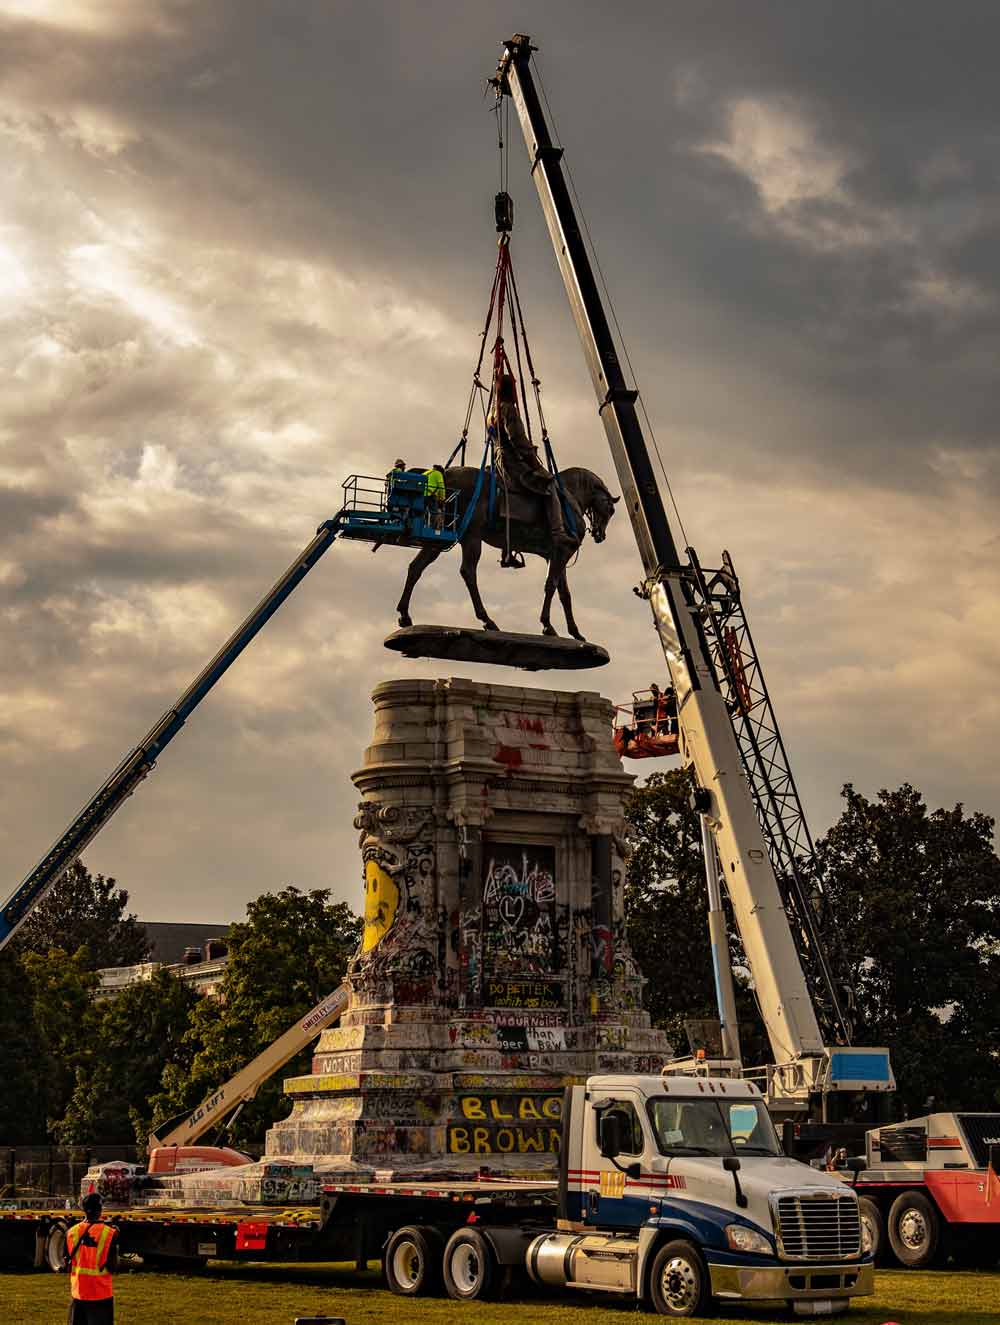 Robert E. Lee statue in Richmond being removed by a crane.